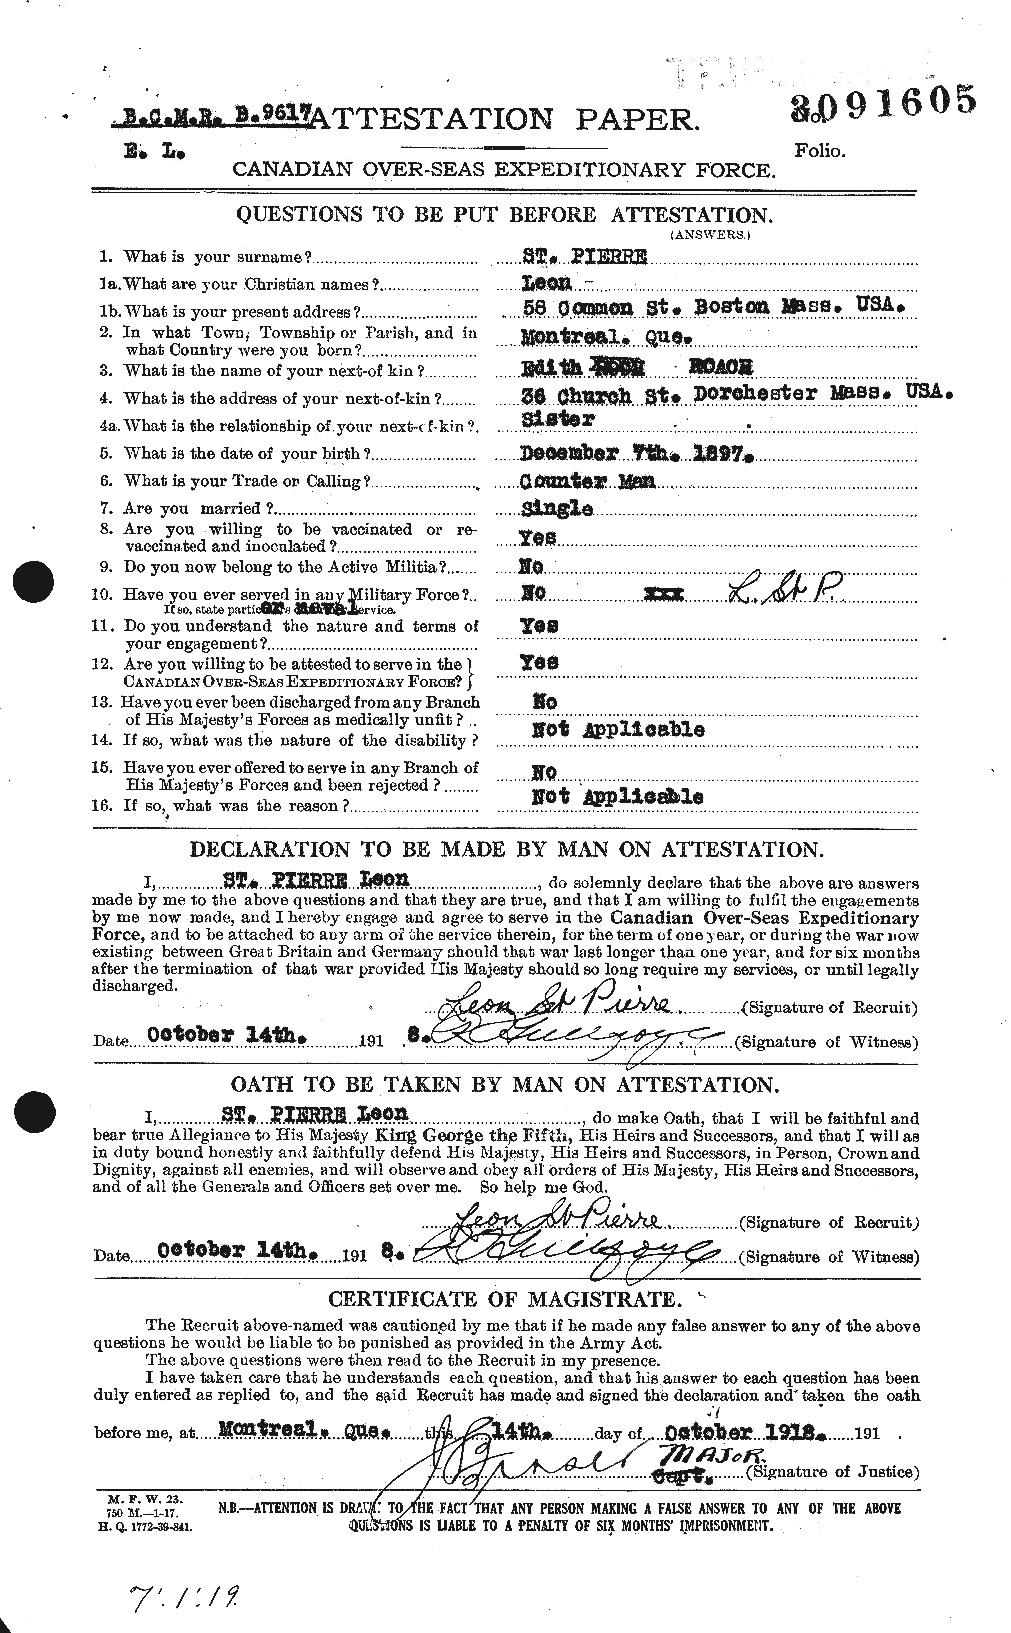 Personnel Records of the First World War - CEF 077593a